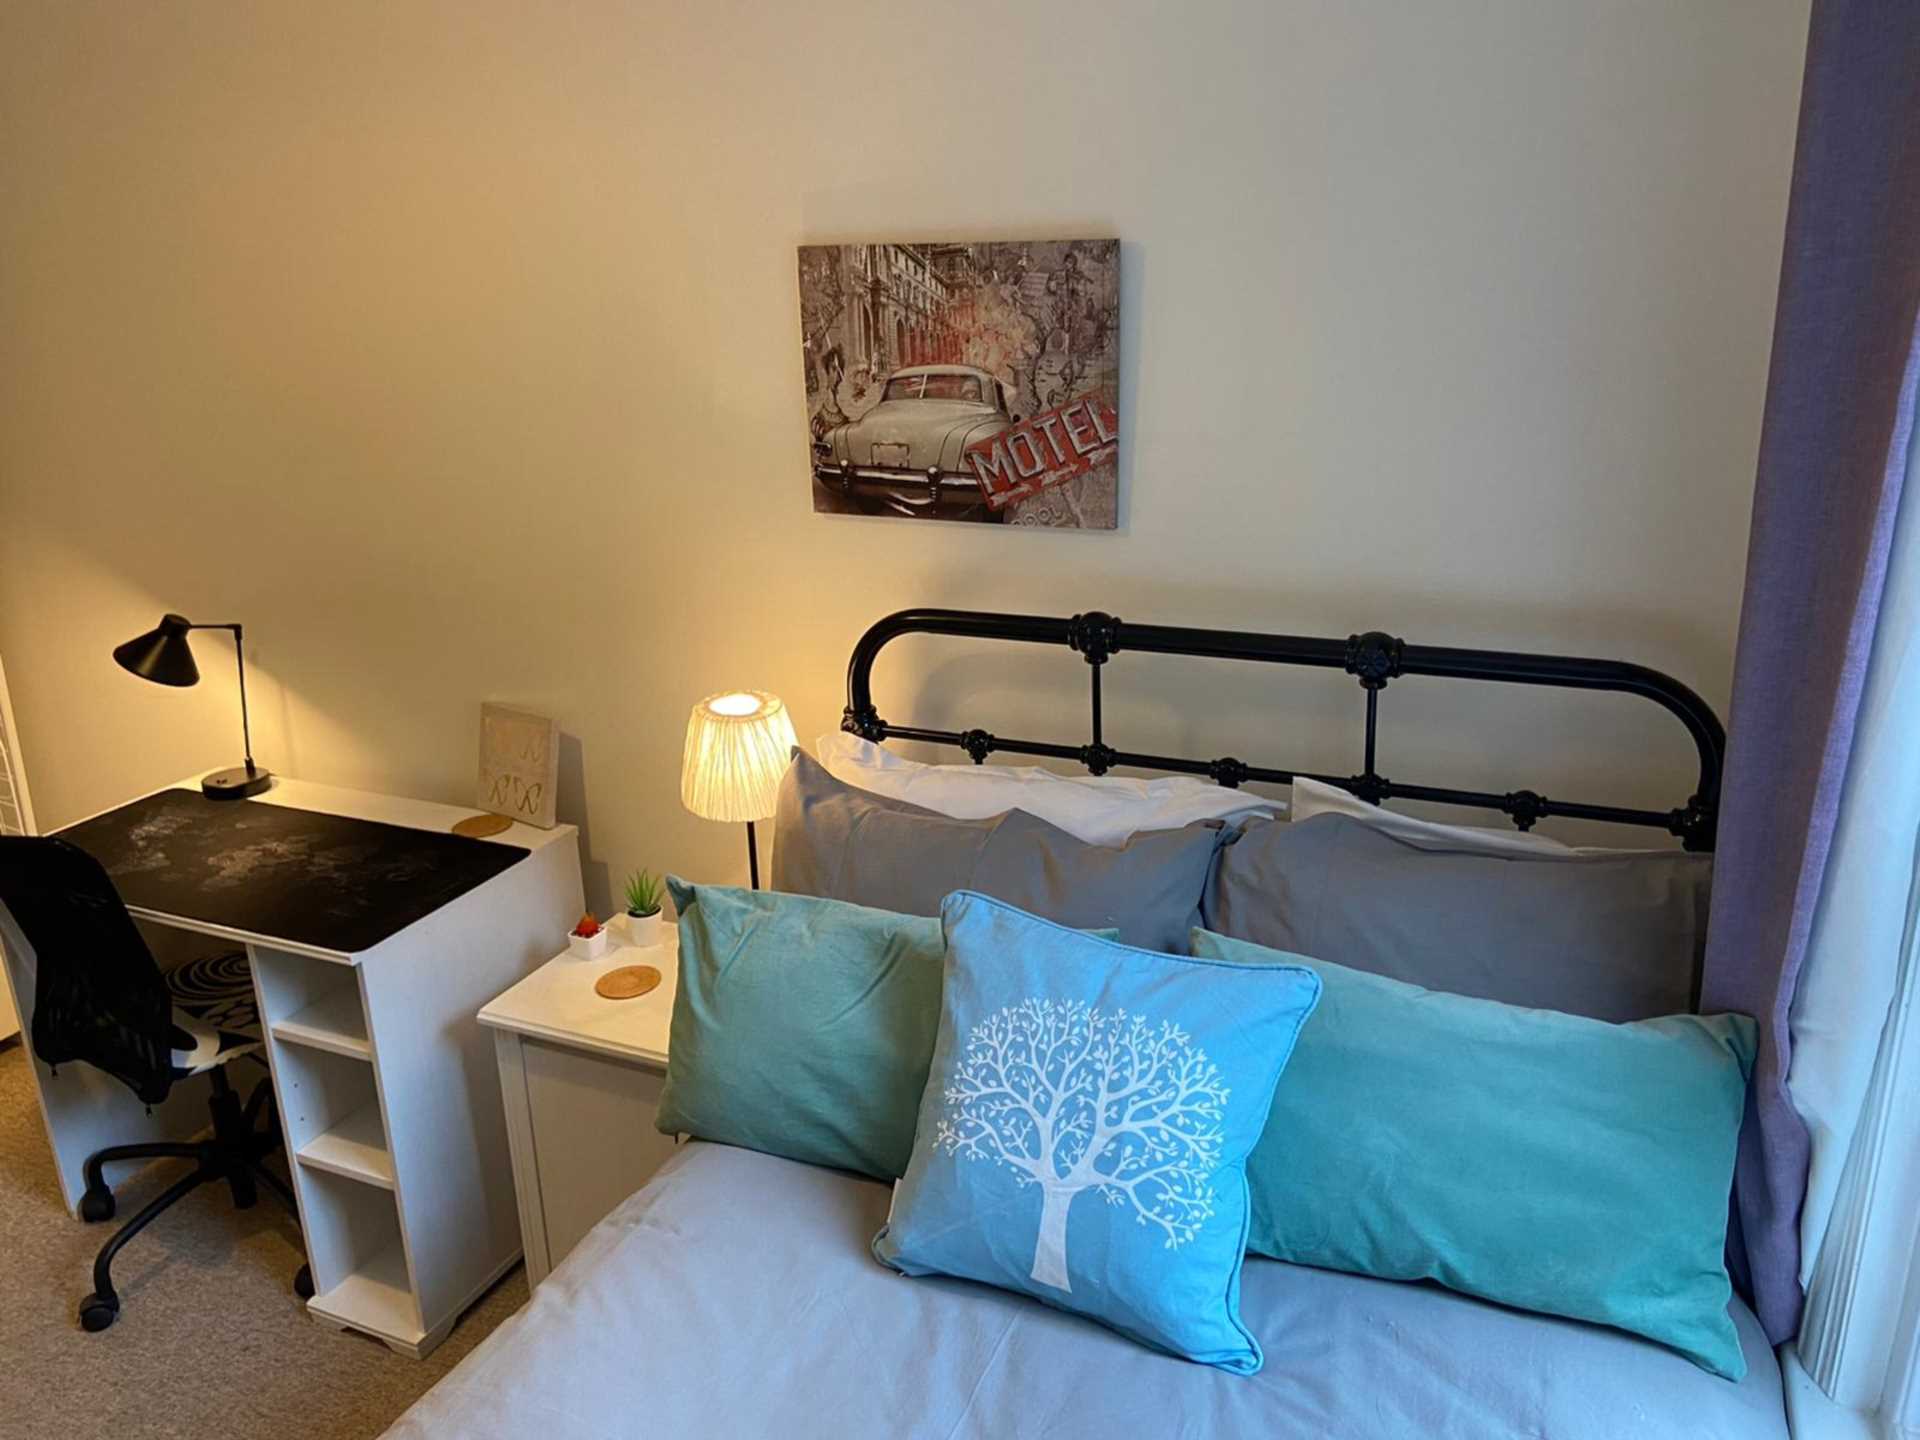 1 bed Room for rent in Guildford. From New Leaf Homes